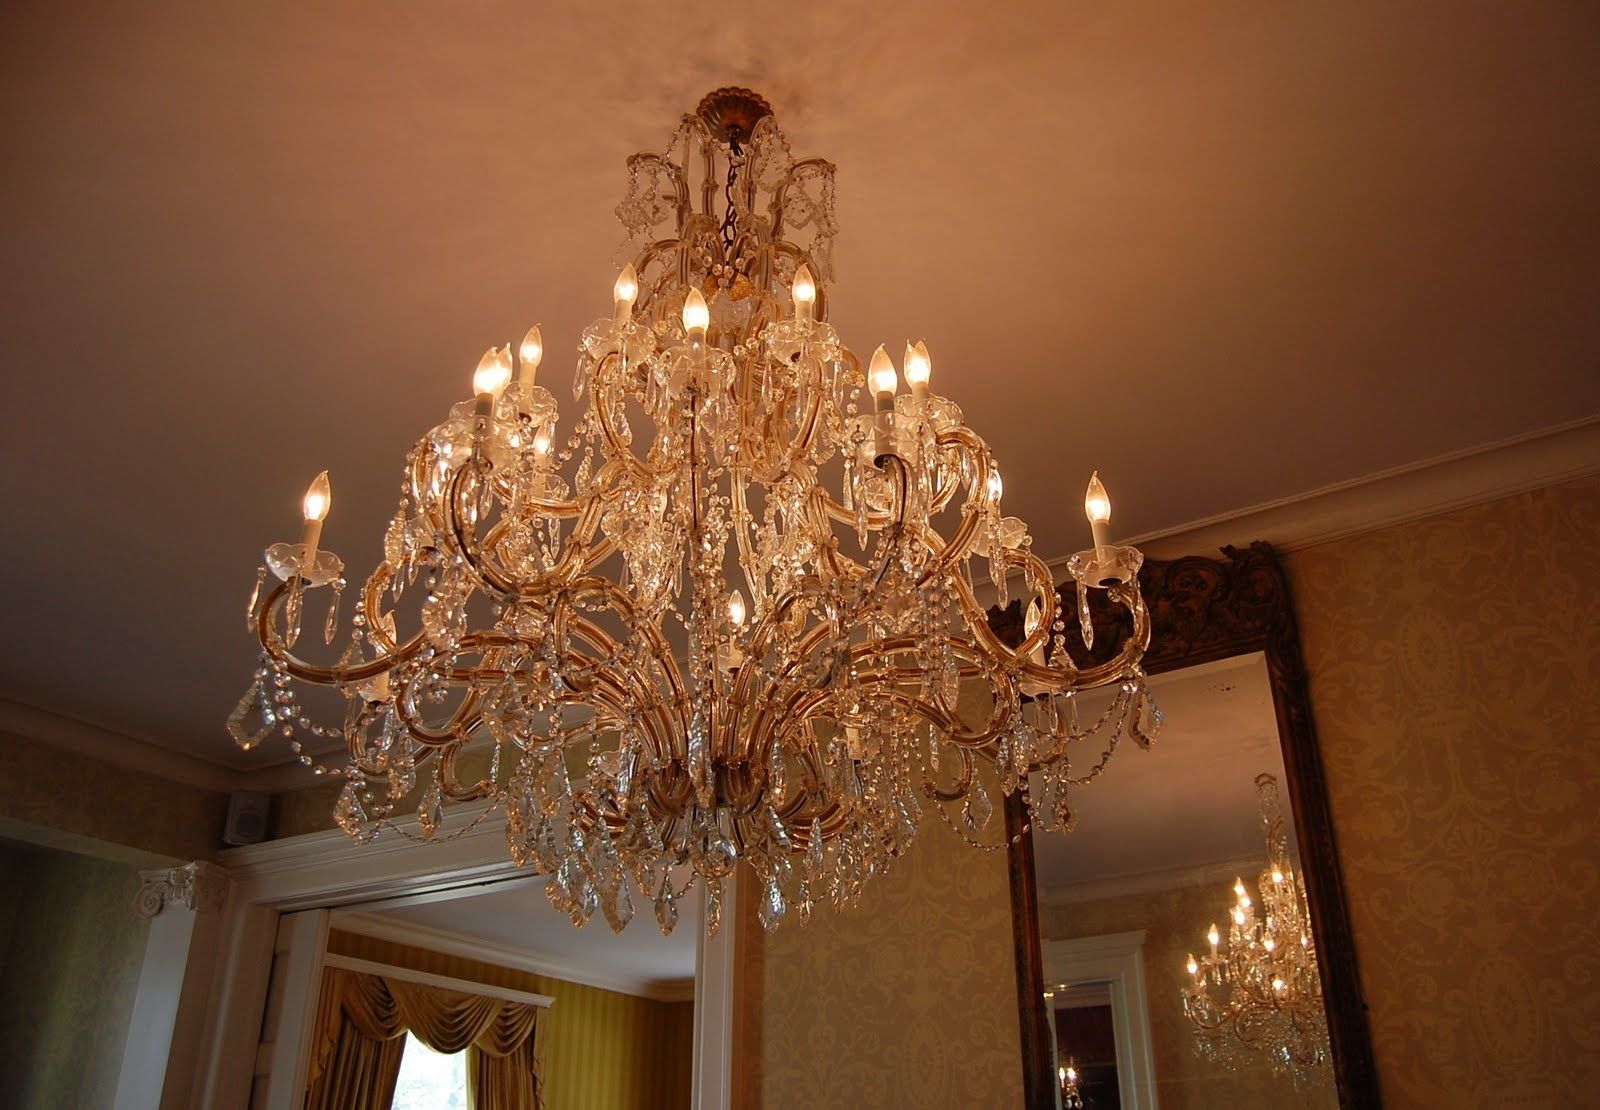 Sherman Slept Here With Huge Chandeliers (View 15 of 15)